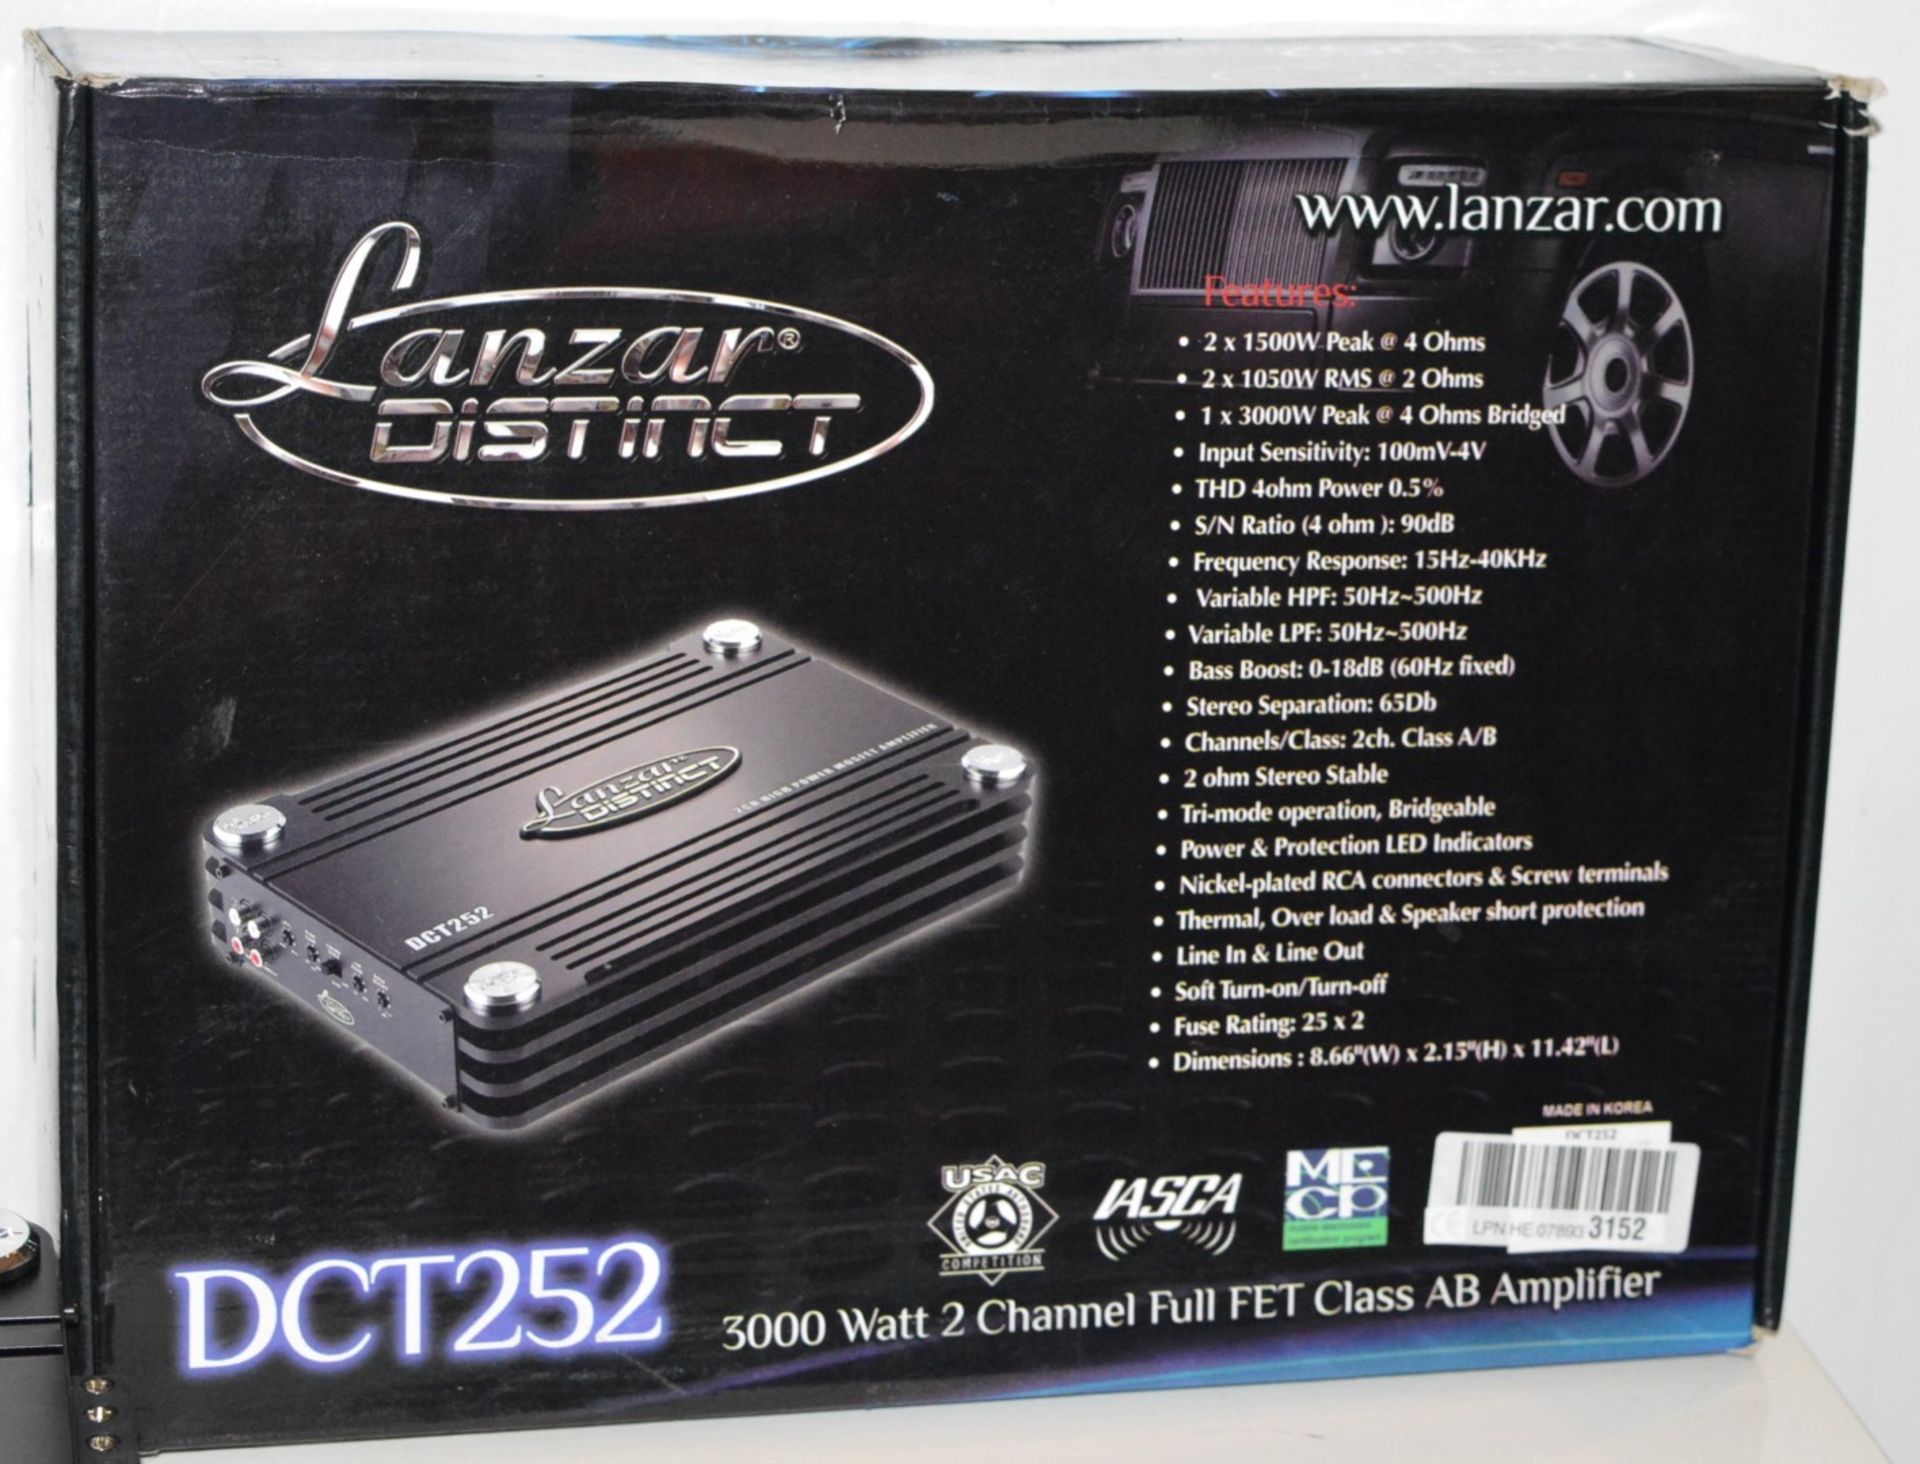 1 x Lanzar Distinct DCT252 3000w 2 Channel Full ET Class AB Vehicle Amplifier 7018B 7 Inch In-Dash - Image 3 of 8